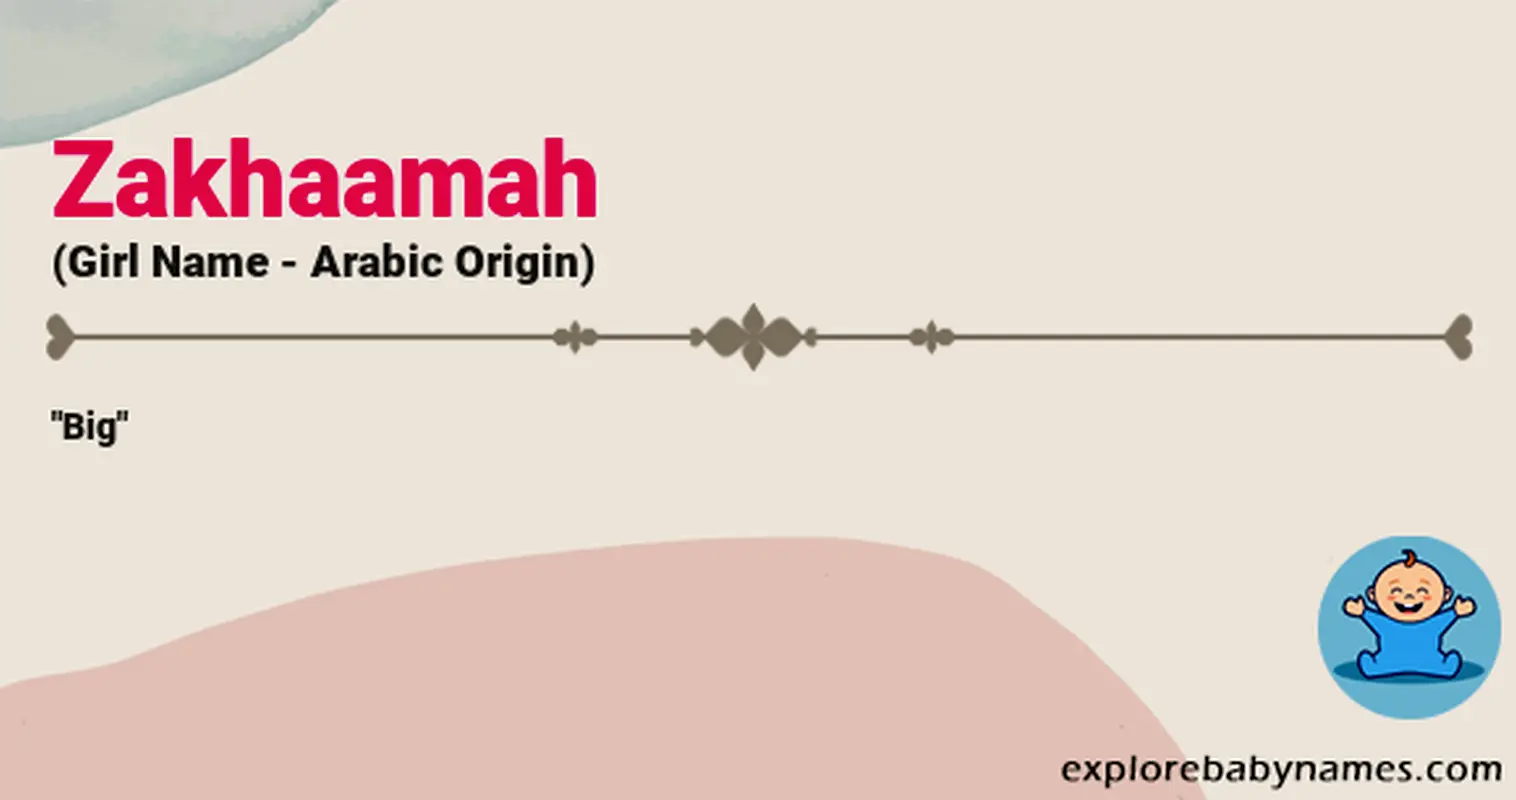 Meaning of Zakhaamah